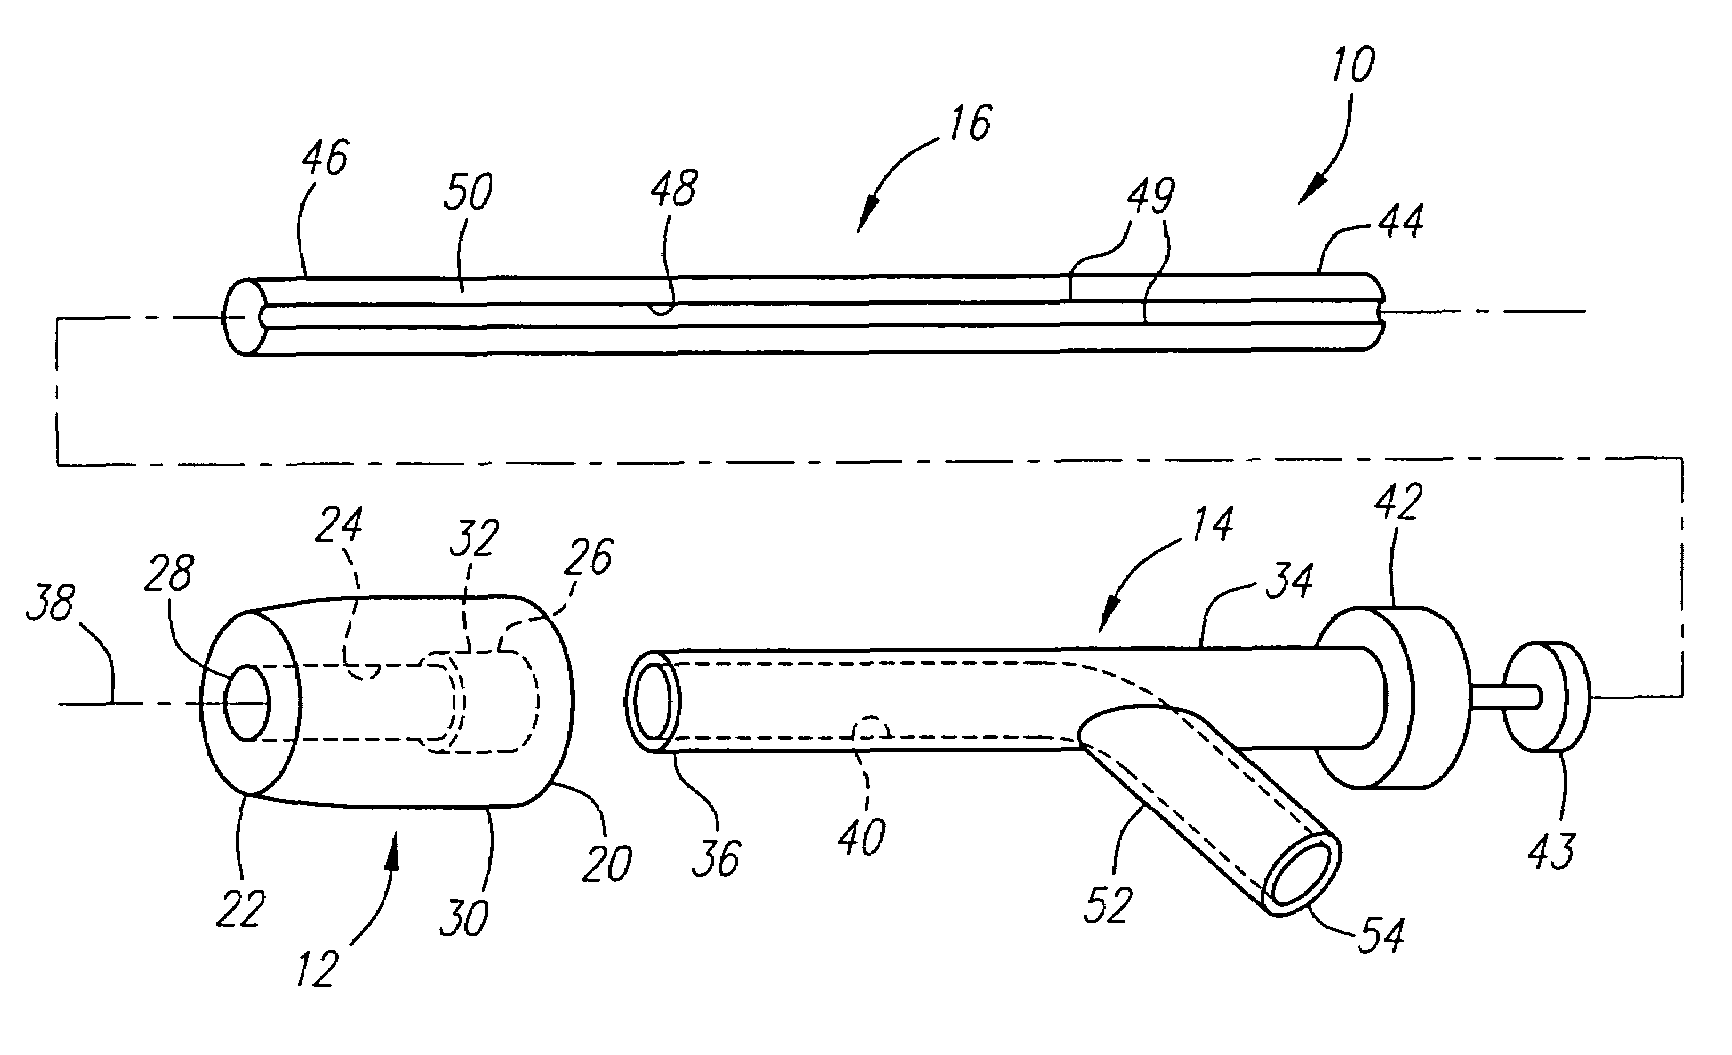 Apparatus and methods for sealing vascular punctures